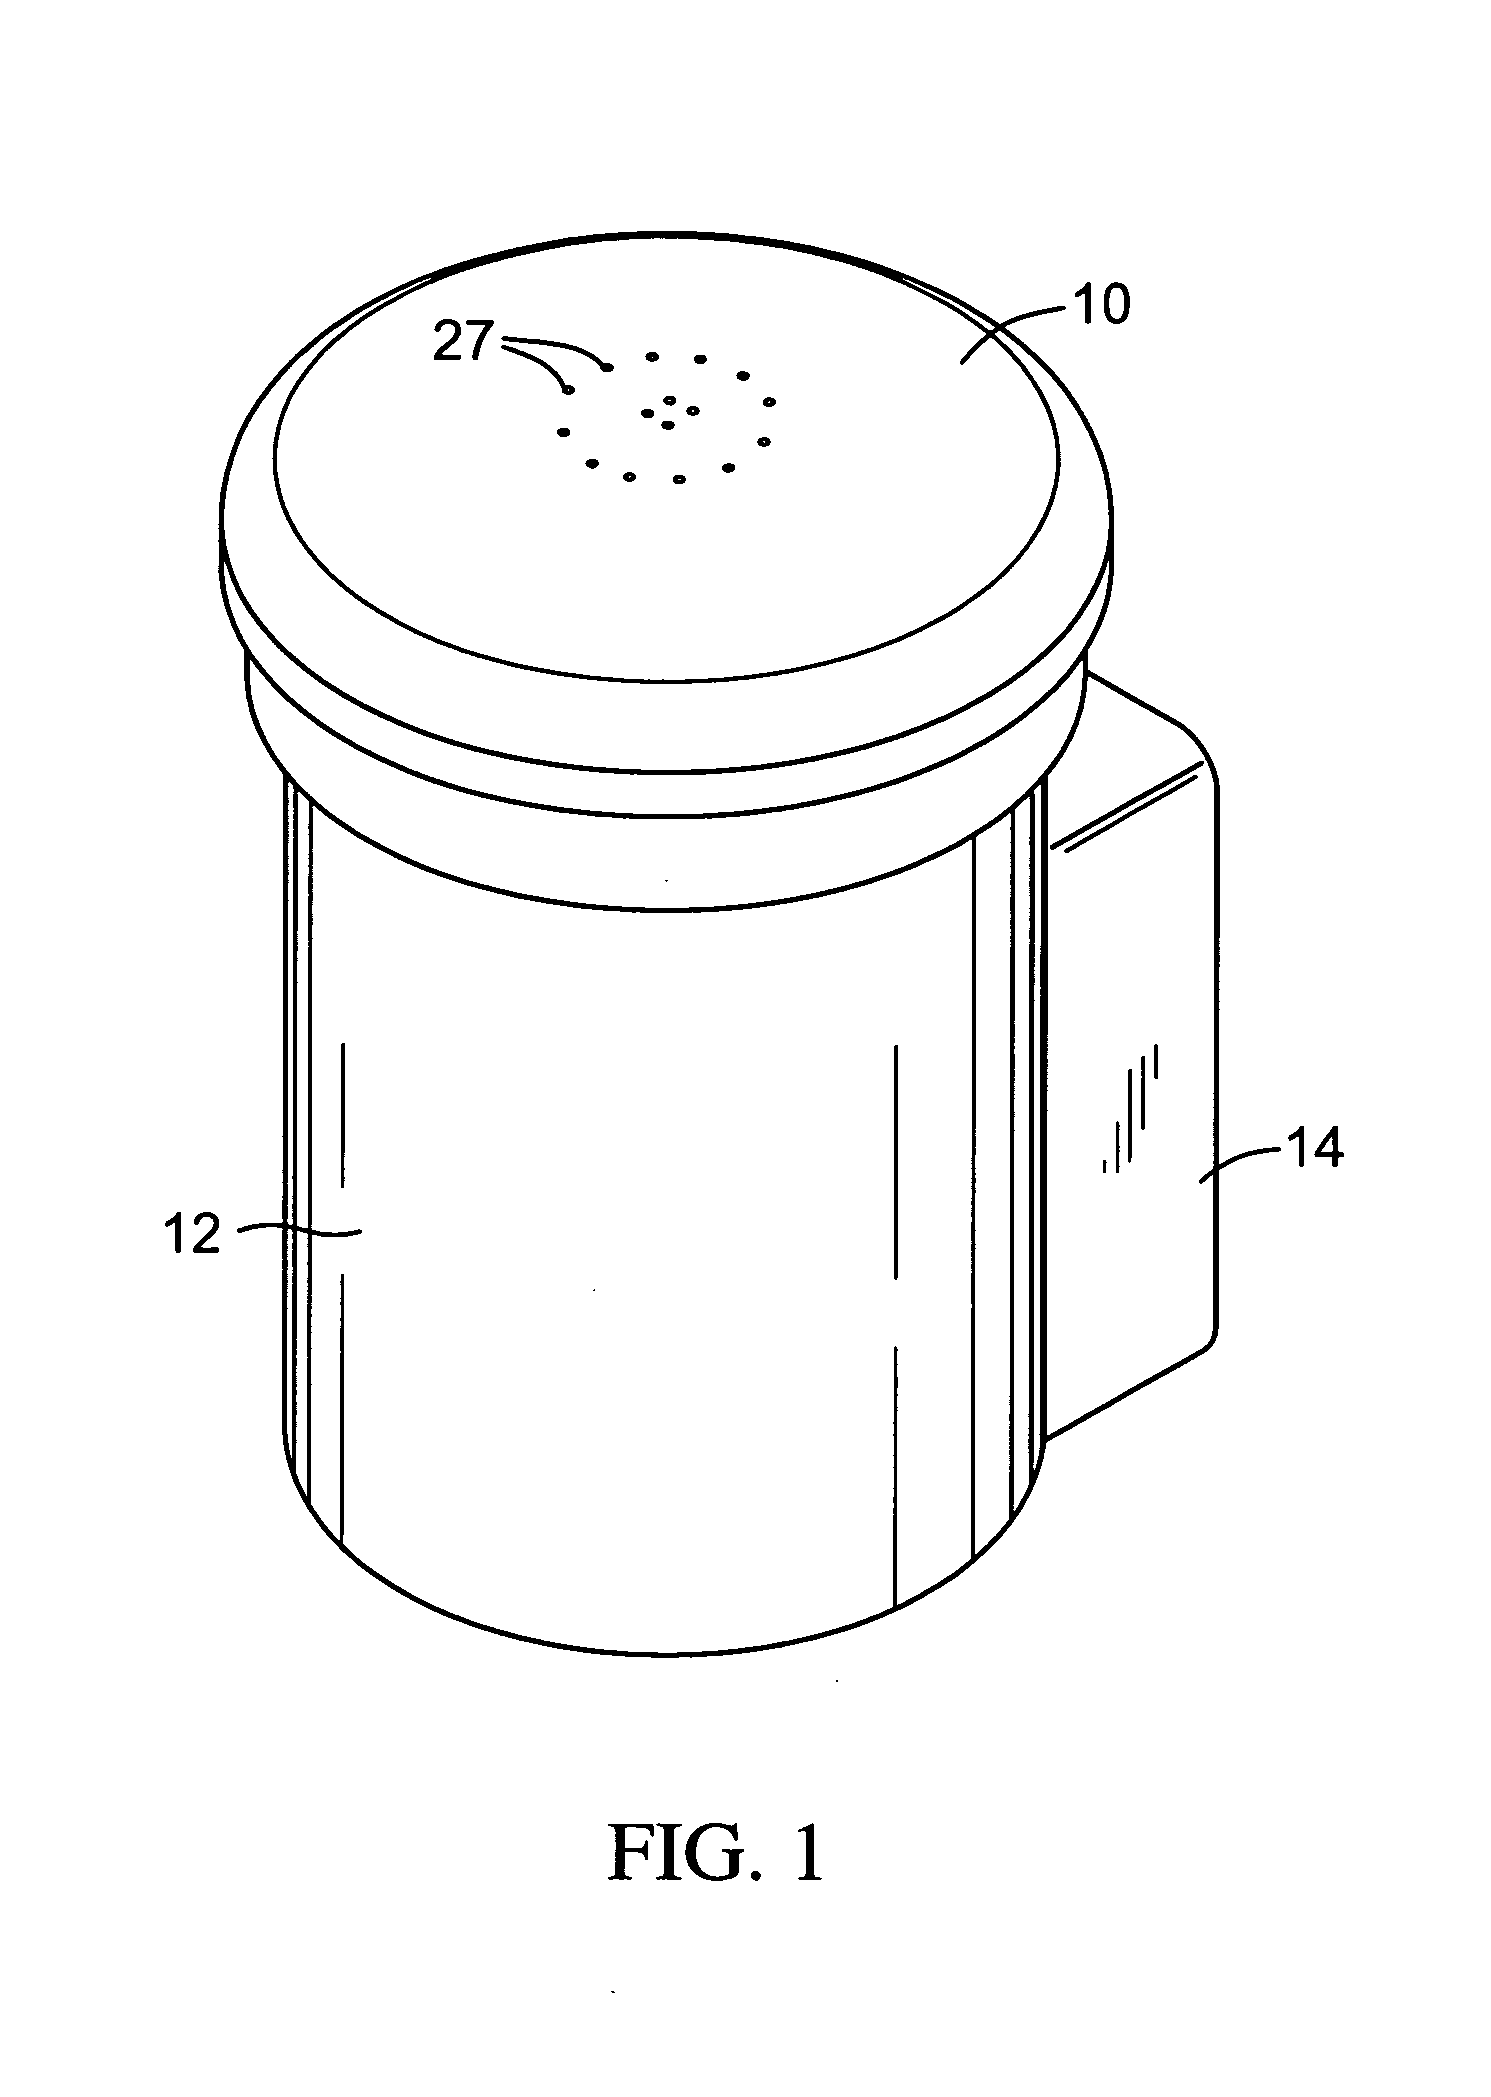 Apparatus for supporting and disinfecting a handheld instrument and/or a portion of the user's hand